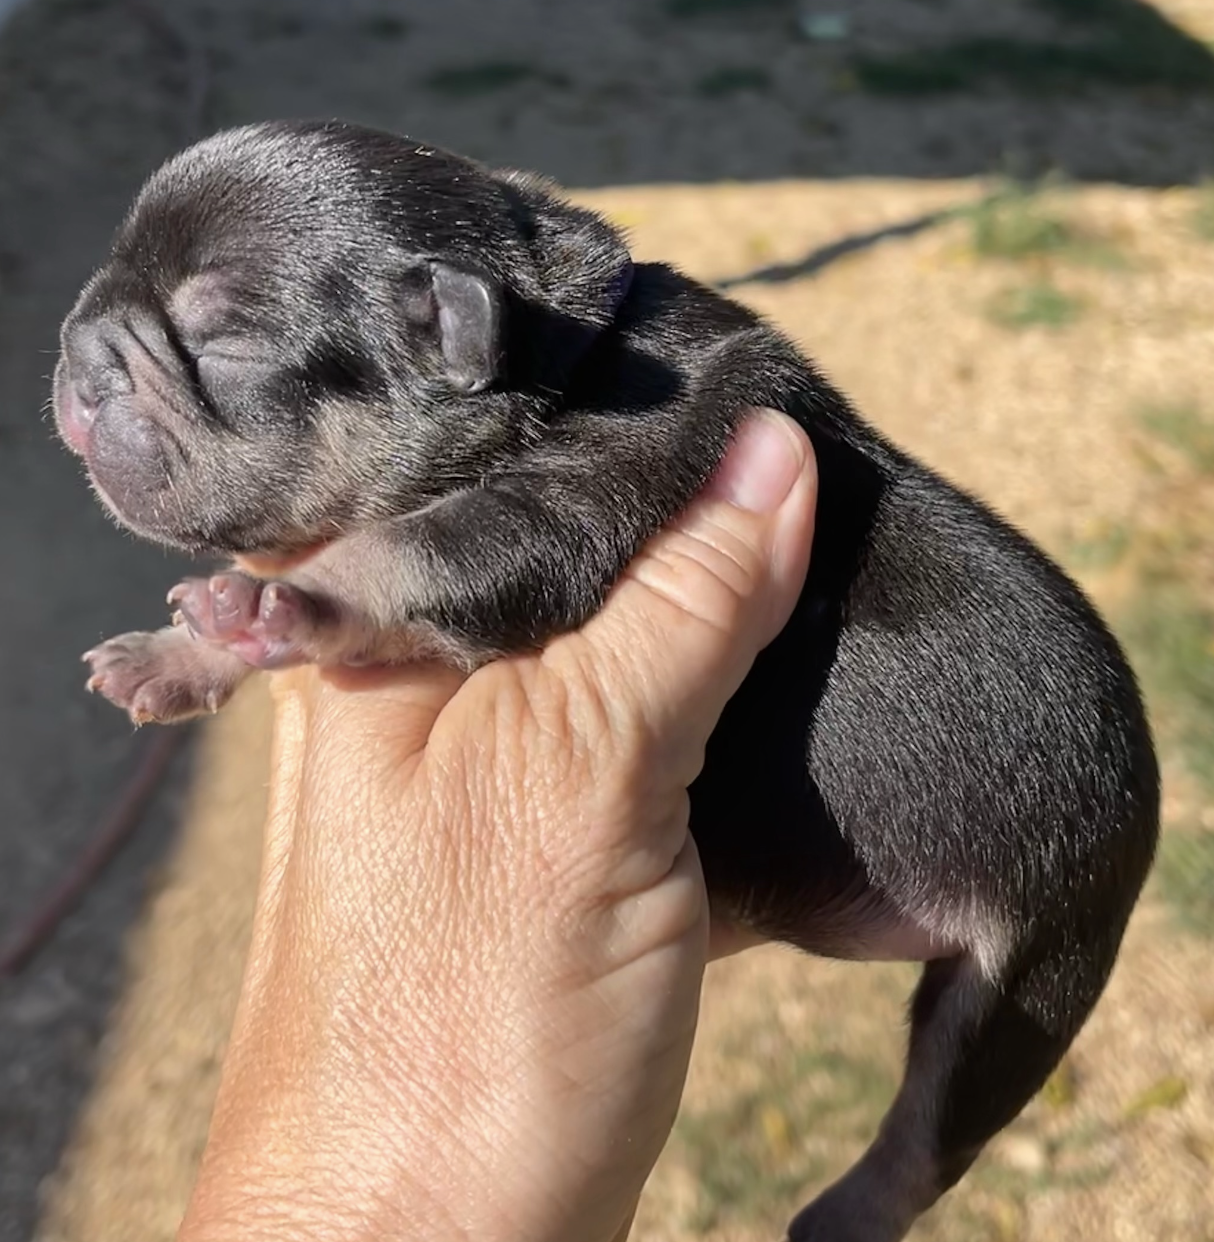 Sable and Black and Tan French Bulldog Males Litter Page: Born 9/13/22